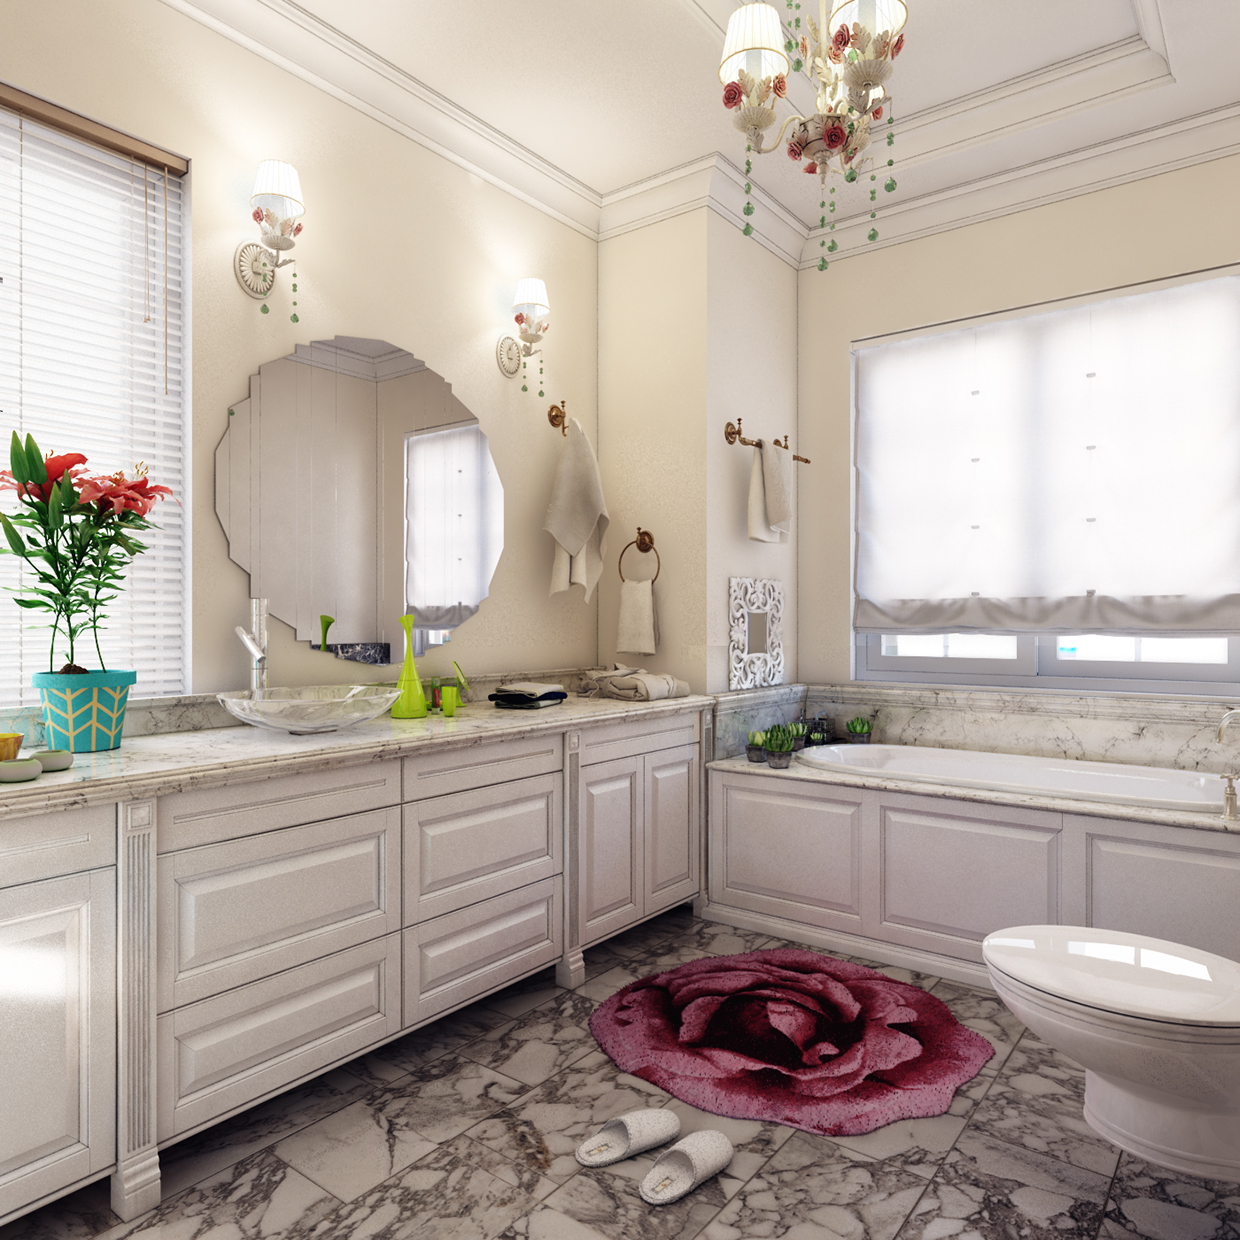 Decoration ideas for small bathrooms "width =" 1240 "height =" 1240 "srcset =" https://mileray.com/wp-content/uploads/2020/05/1588514962_498_Decorating-Small-Bathroom-Designs-With-Colorful-Paint-Wall-Making-It.jpg 1240w, https: // myfashionos .com / wp-content / uploads / 2016/08 / Koj-Design6-1-150x150.jpg 150w, https://mileray.com/wp-content/uploads/2016/08/Koj-Design6-1-300x300. jpg 300w, https://mileray.com/wp-content/uploads/2016/08/Koj-Design6-1-768x768.jpg 768w, https://mileray.com/wp-content/uploads/2016/08 / Koj-Design6-1-1024x1024.jpg 1024w, https://mileray.com/wp-content/uploads/2016/08/Koj-Design6-1-696x696.jpg 696w, https://mileray.com/wp - content / uploads / 2016/08 / Koj-Design6-1-1068x1068.jpg 1068w, https://mileray.com/wp-content/uploads/2016/08/Koj-Design6-1-420x420.jpg 420w "sizes = "(maximum width: 1240px) 100vw, 1240px